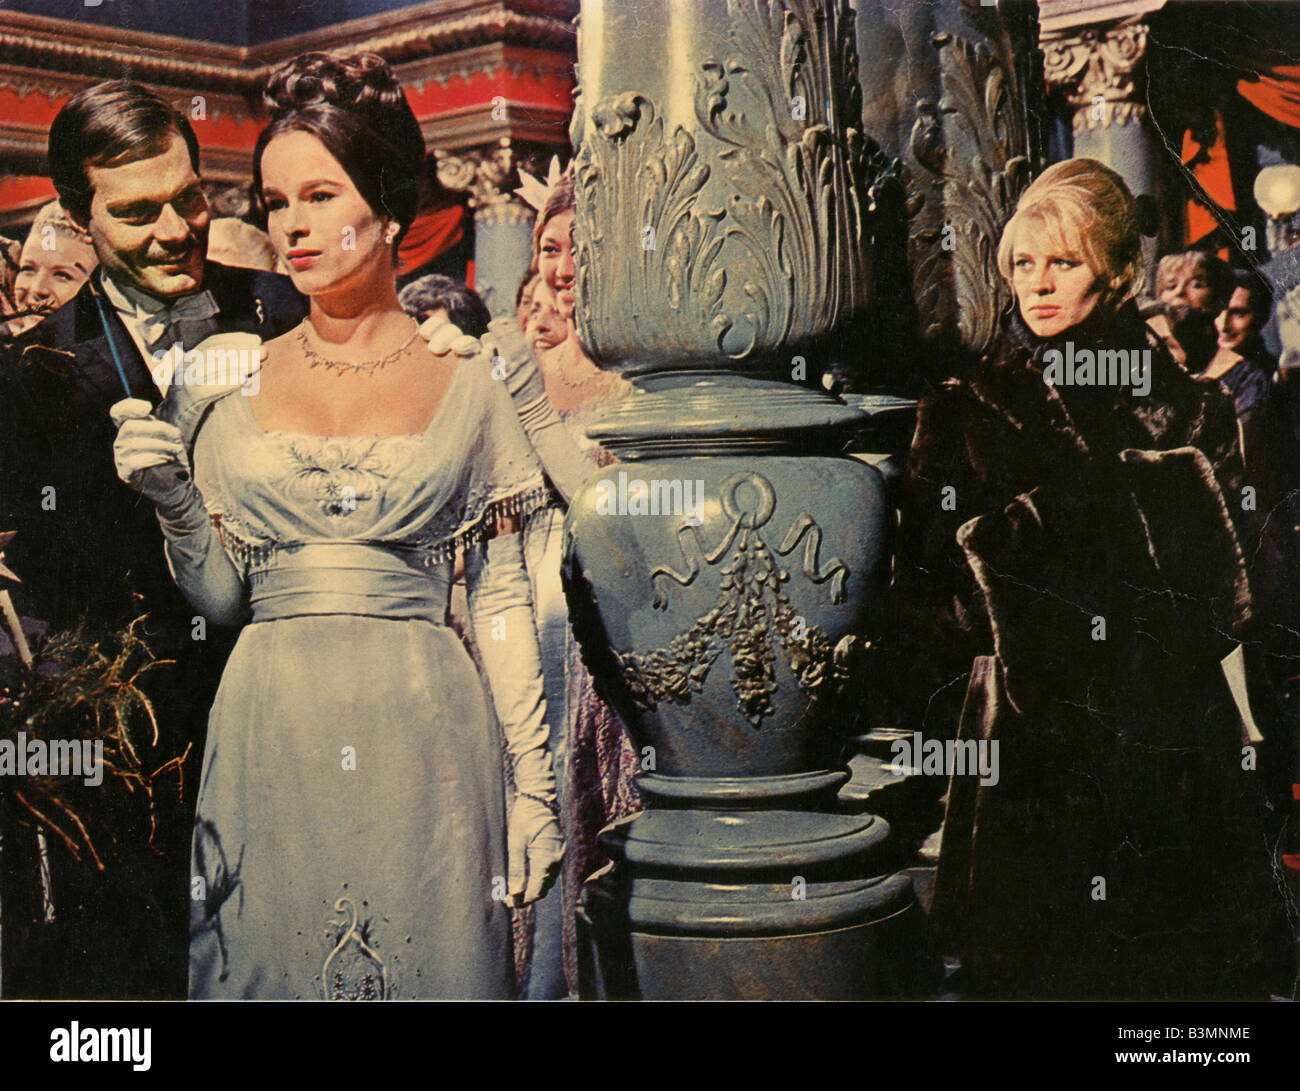 DOCTOR ZHIVAGO 1965 MGM film with Omar Sharif, Geraldine Chaplin and Julie Christie at right Stock Photo